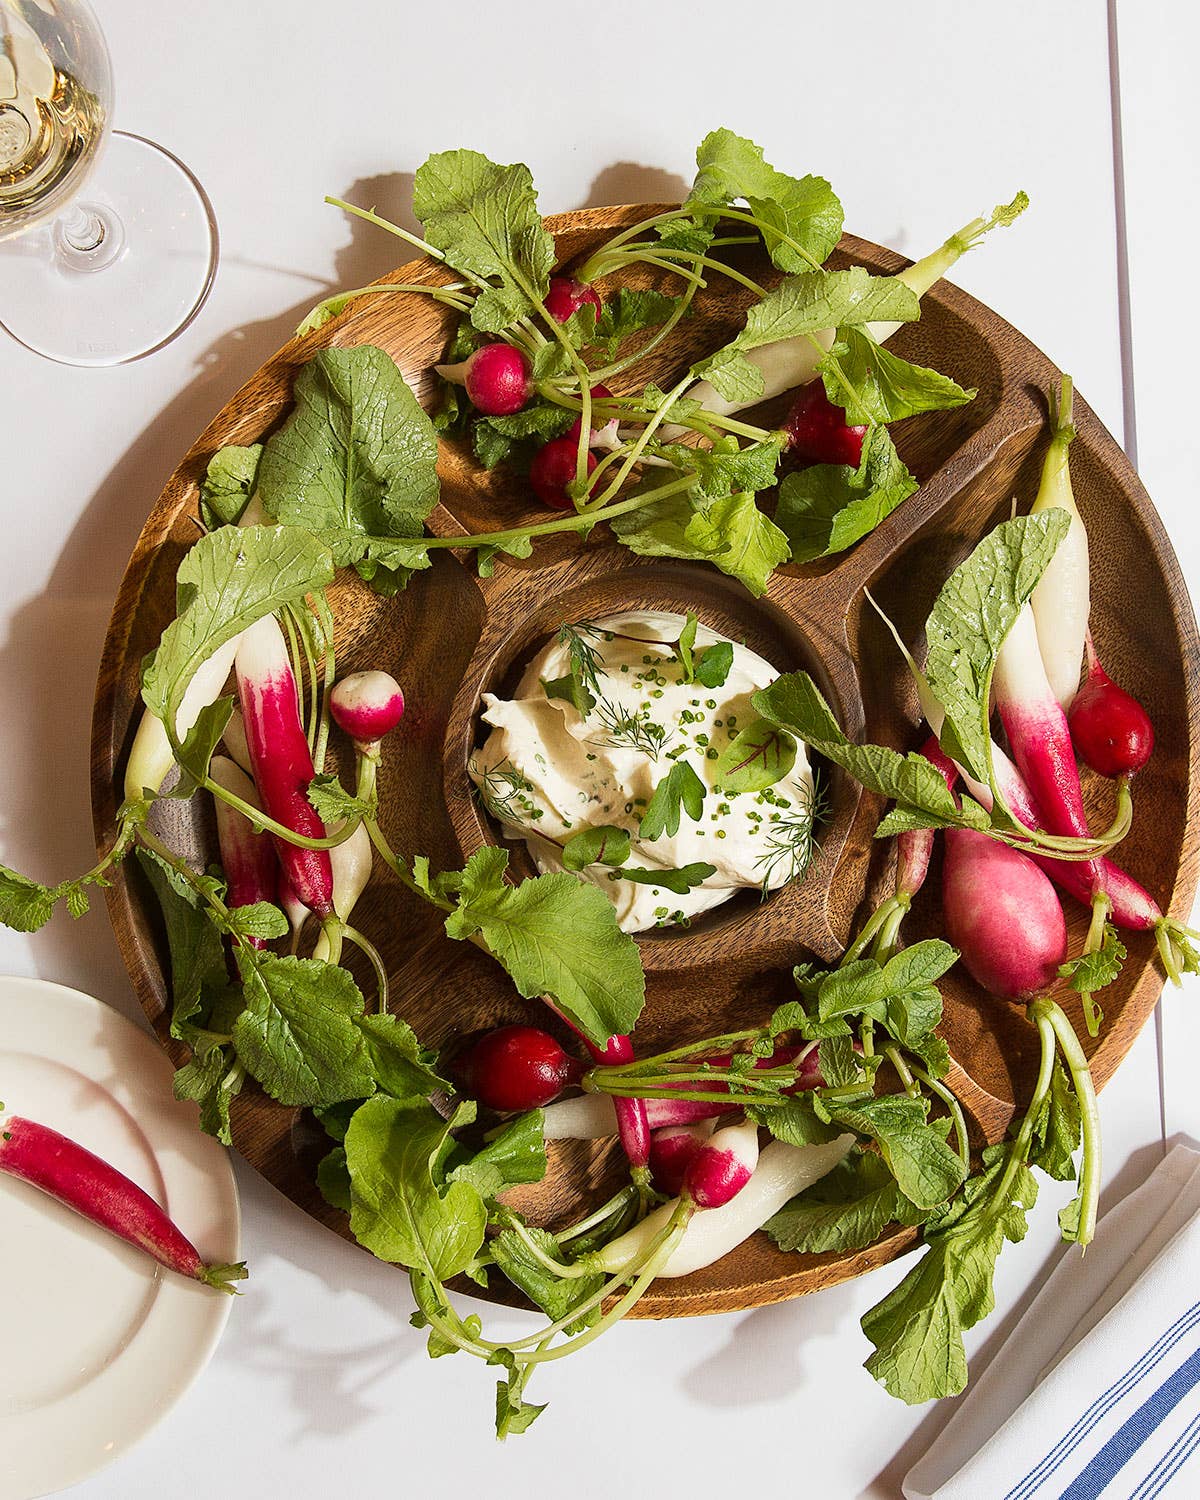 Boursin Dip with Radishes